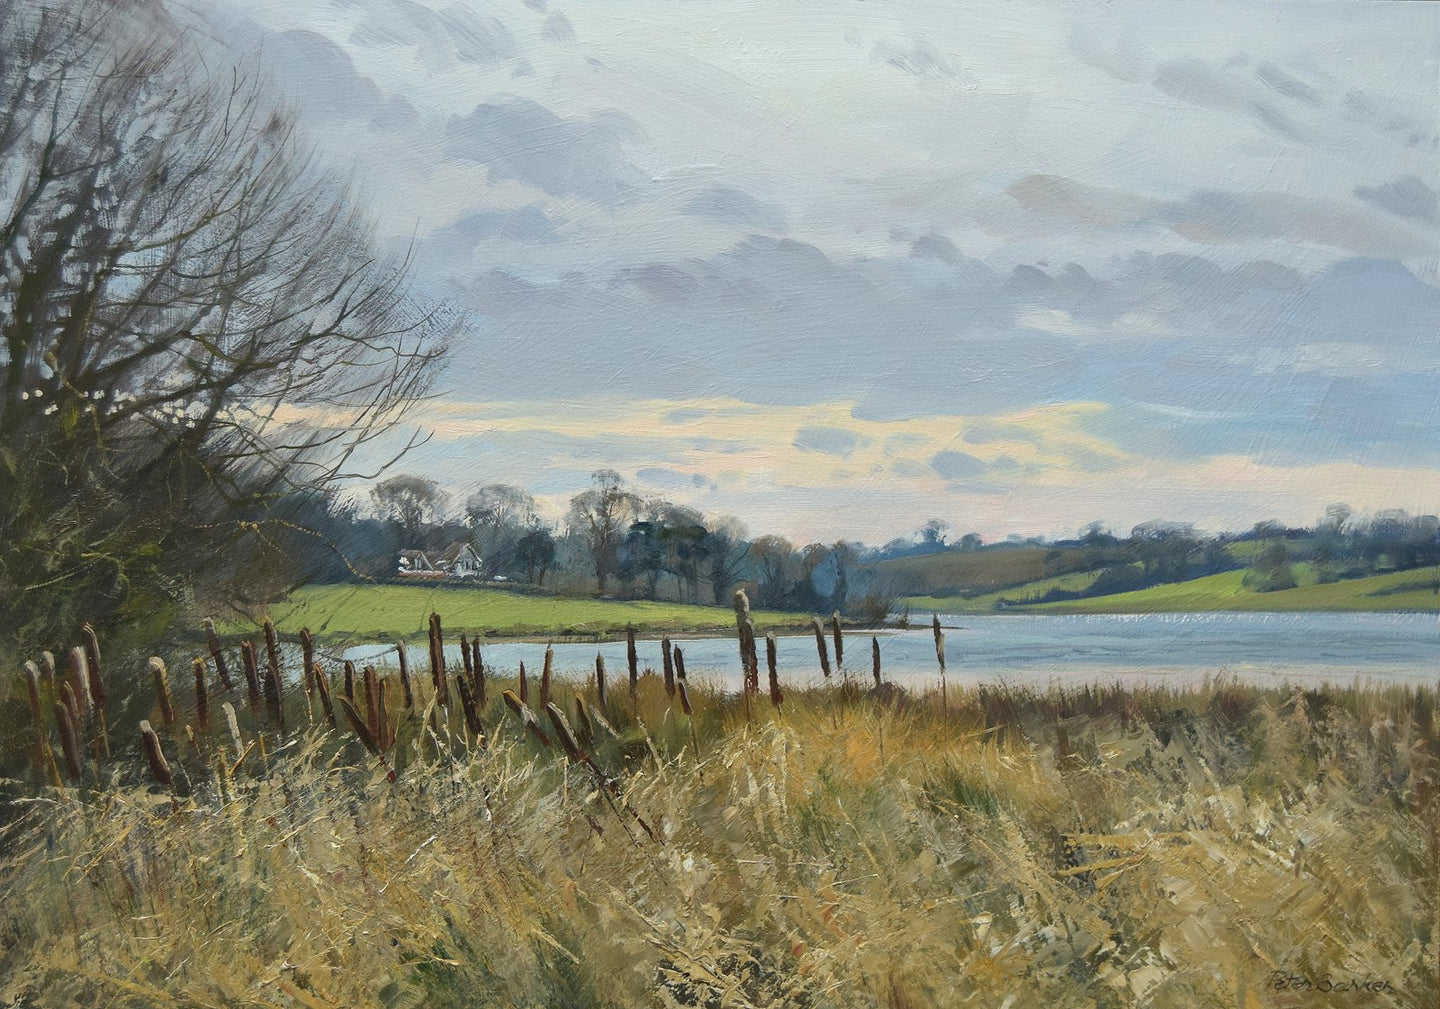 Oil painting by Peter Barker of Reedmace by Rutland Water in a cloudy sky with peachy-yellow colour near horizon